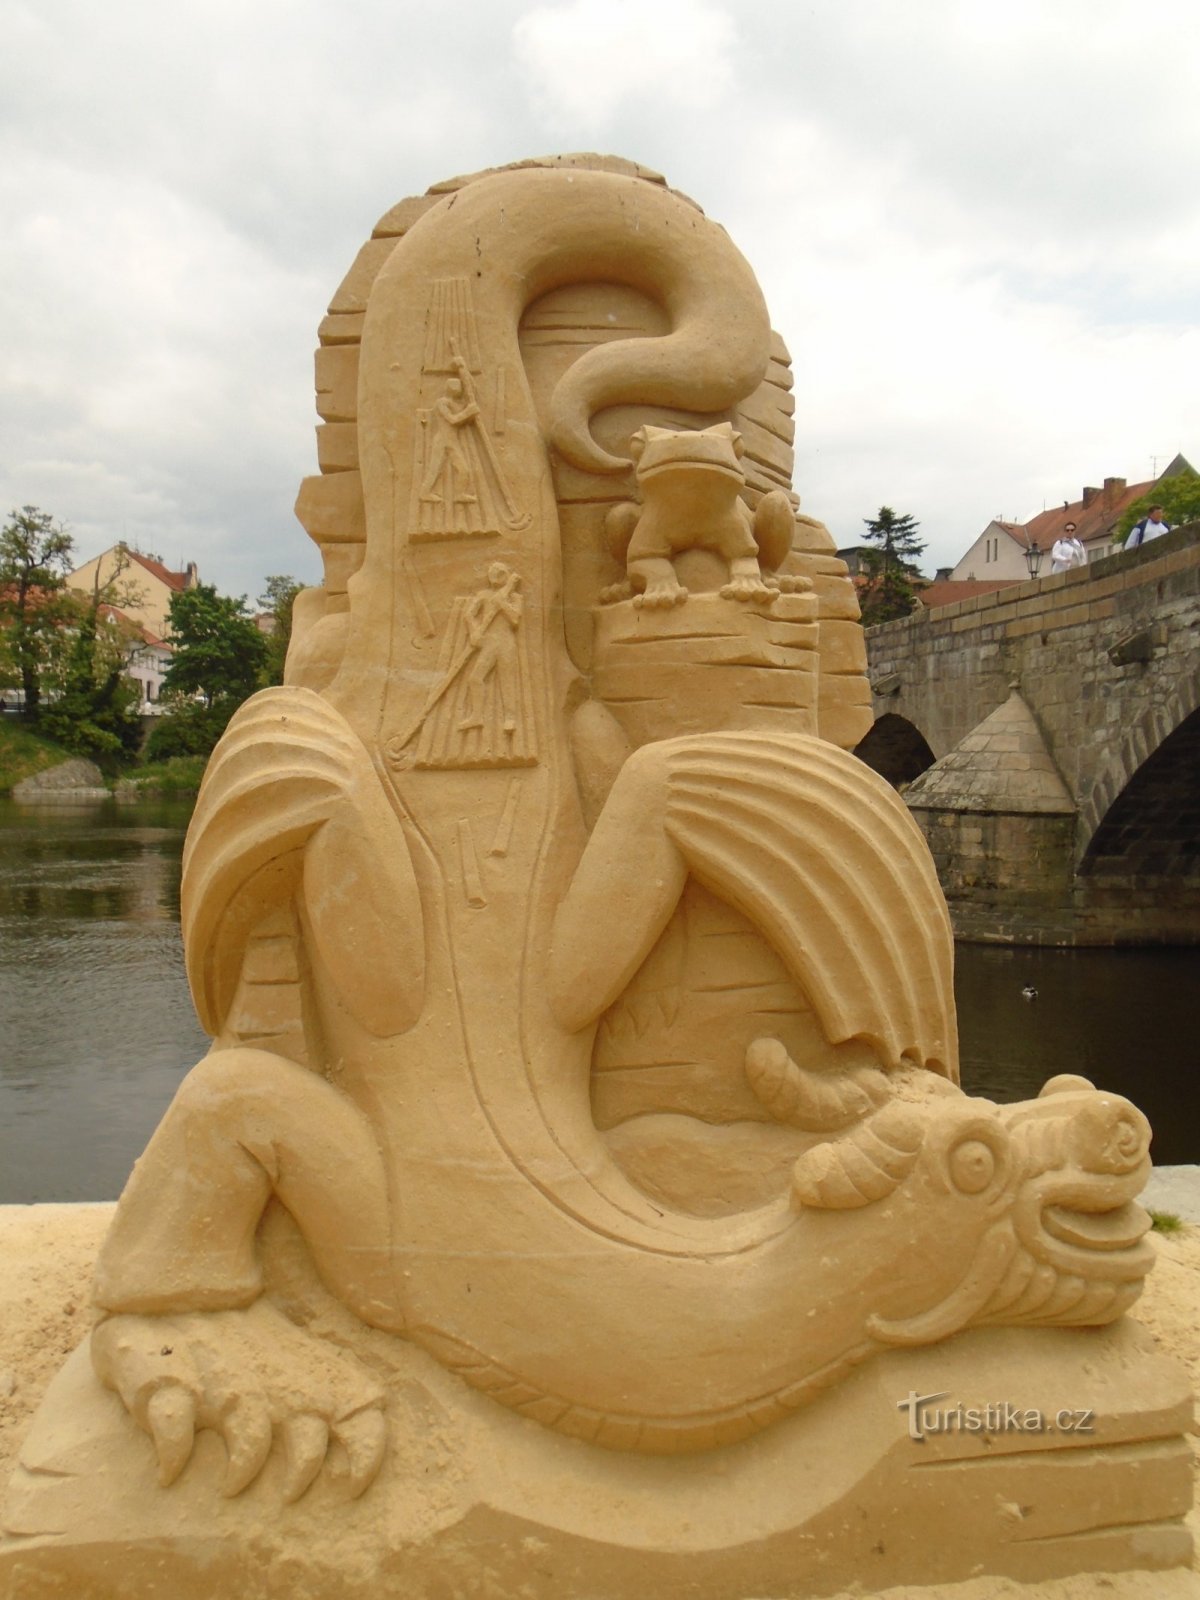 SAND-SCULPTURES FROM SAND